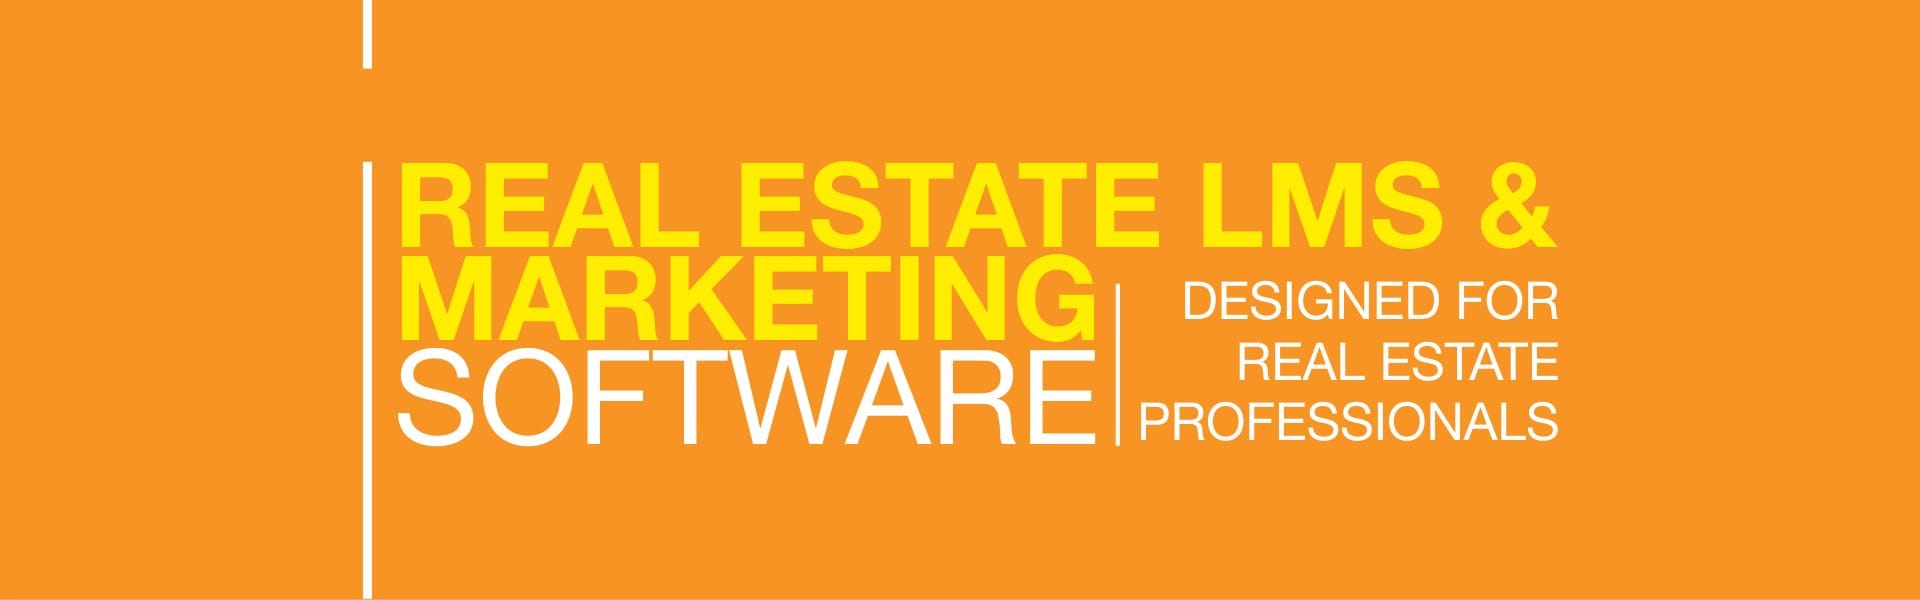 Top Lead Management Software For Real Estate